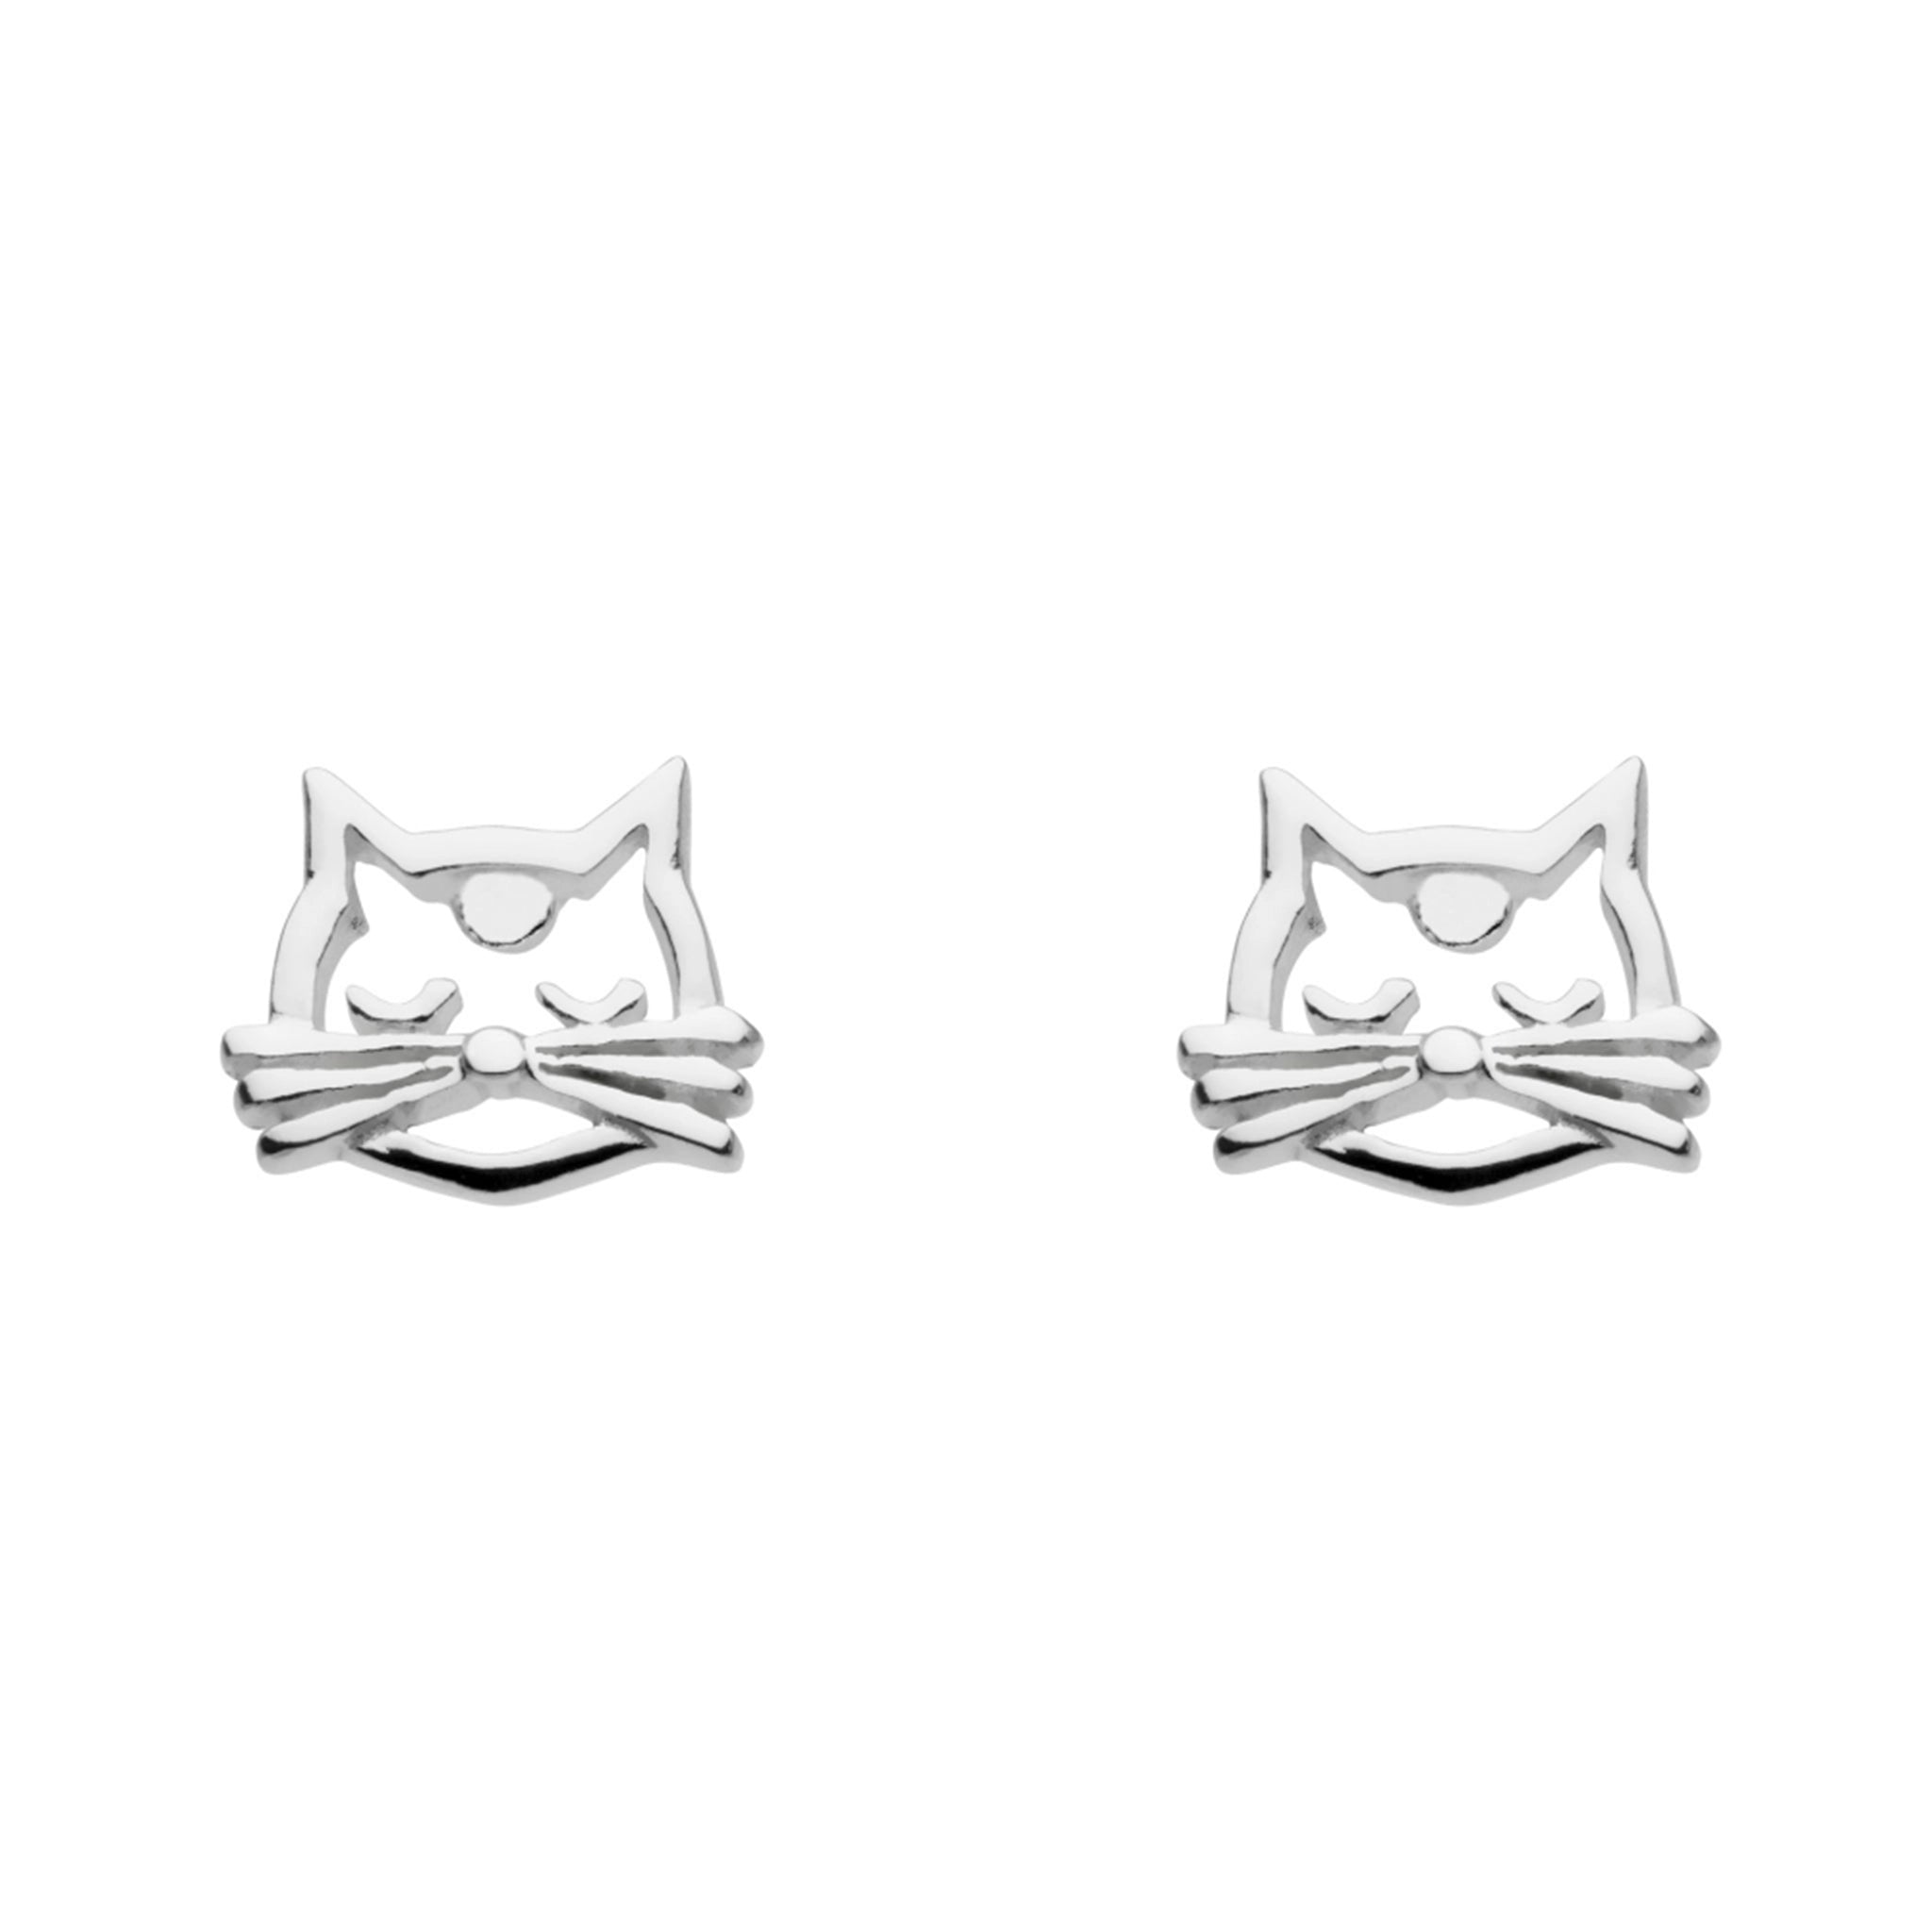 A pair of silver stud earrings shaped like cat faces